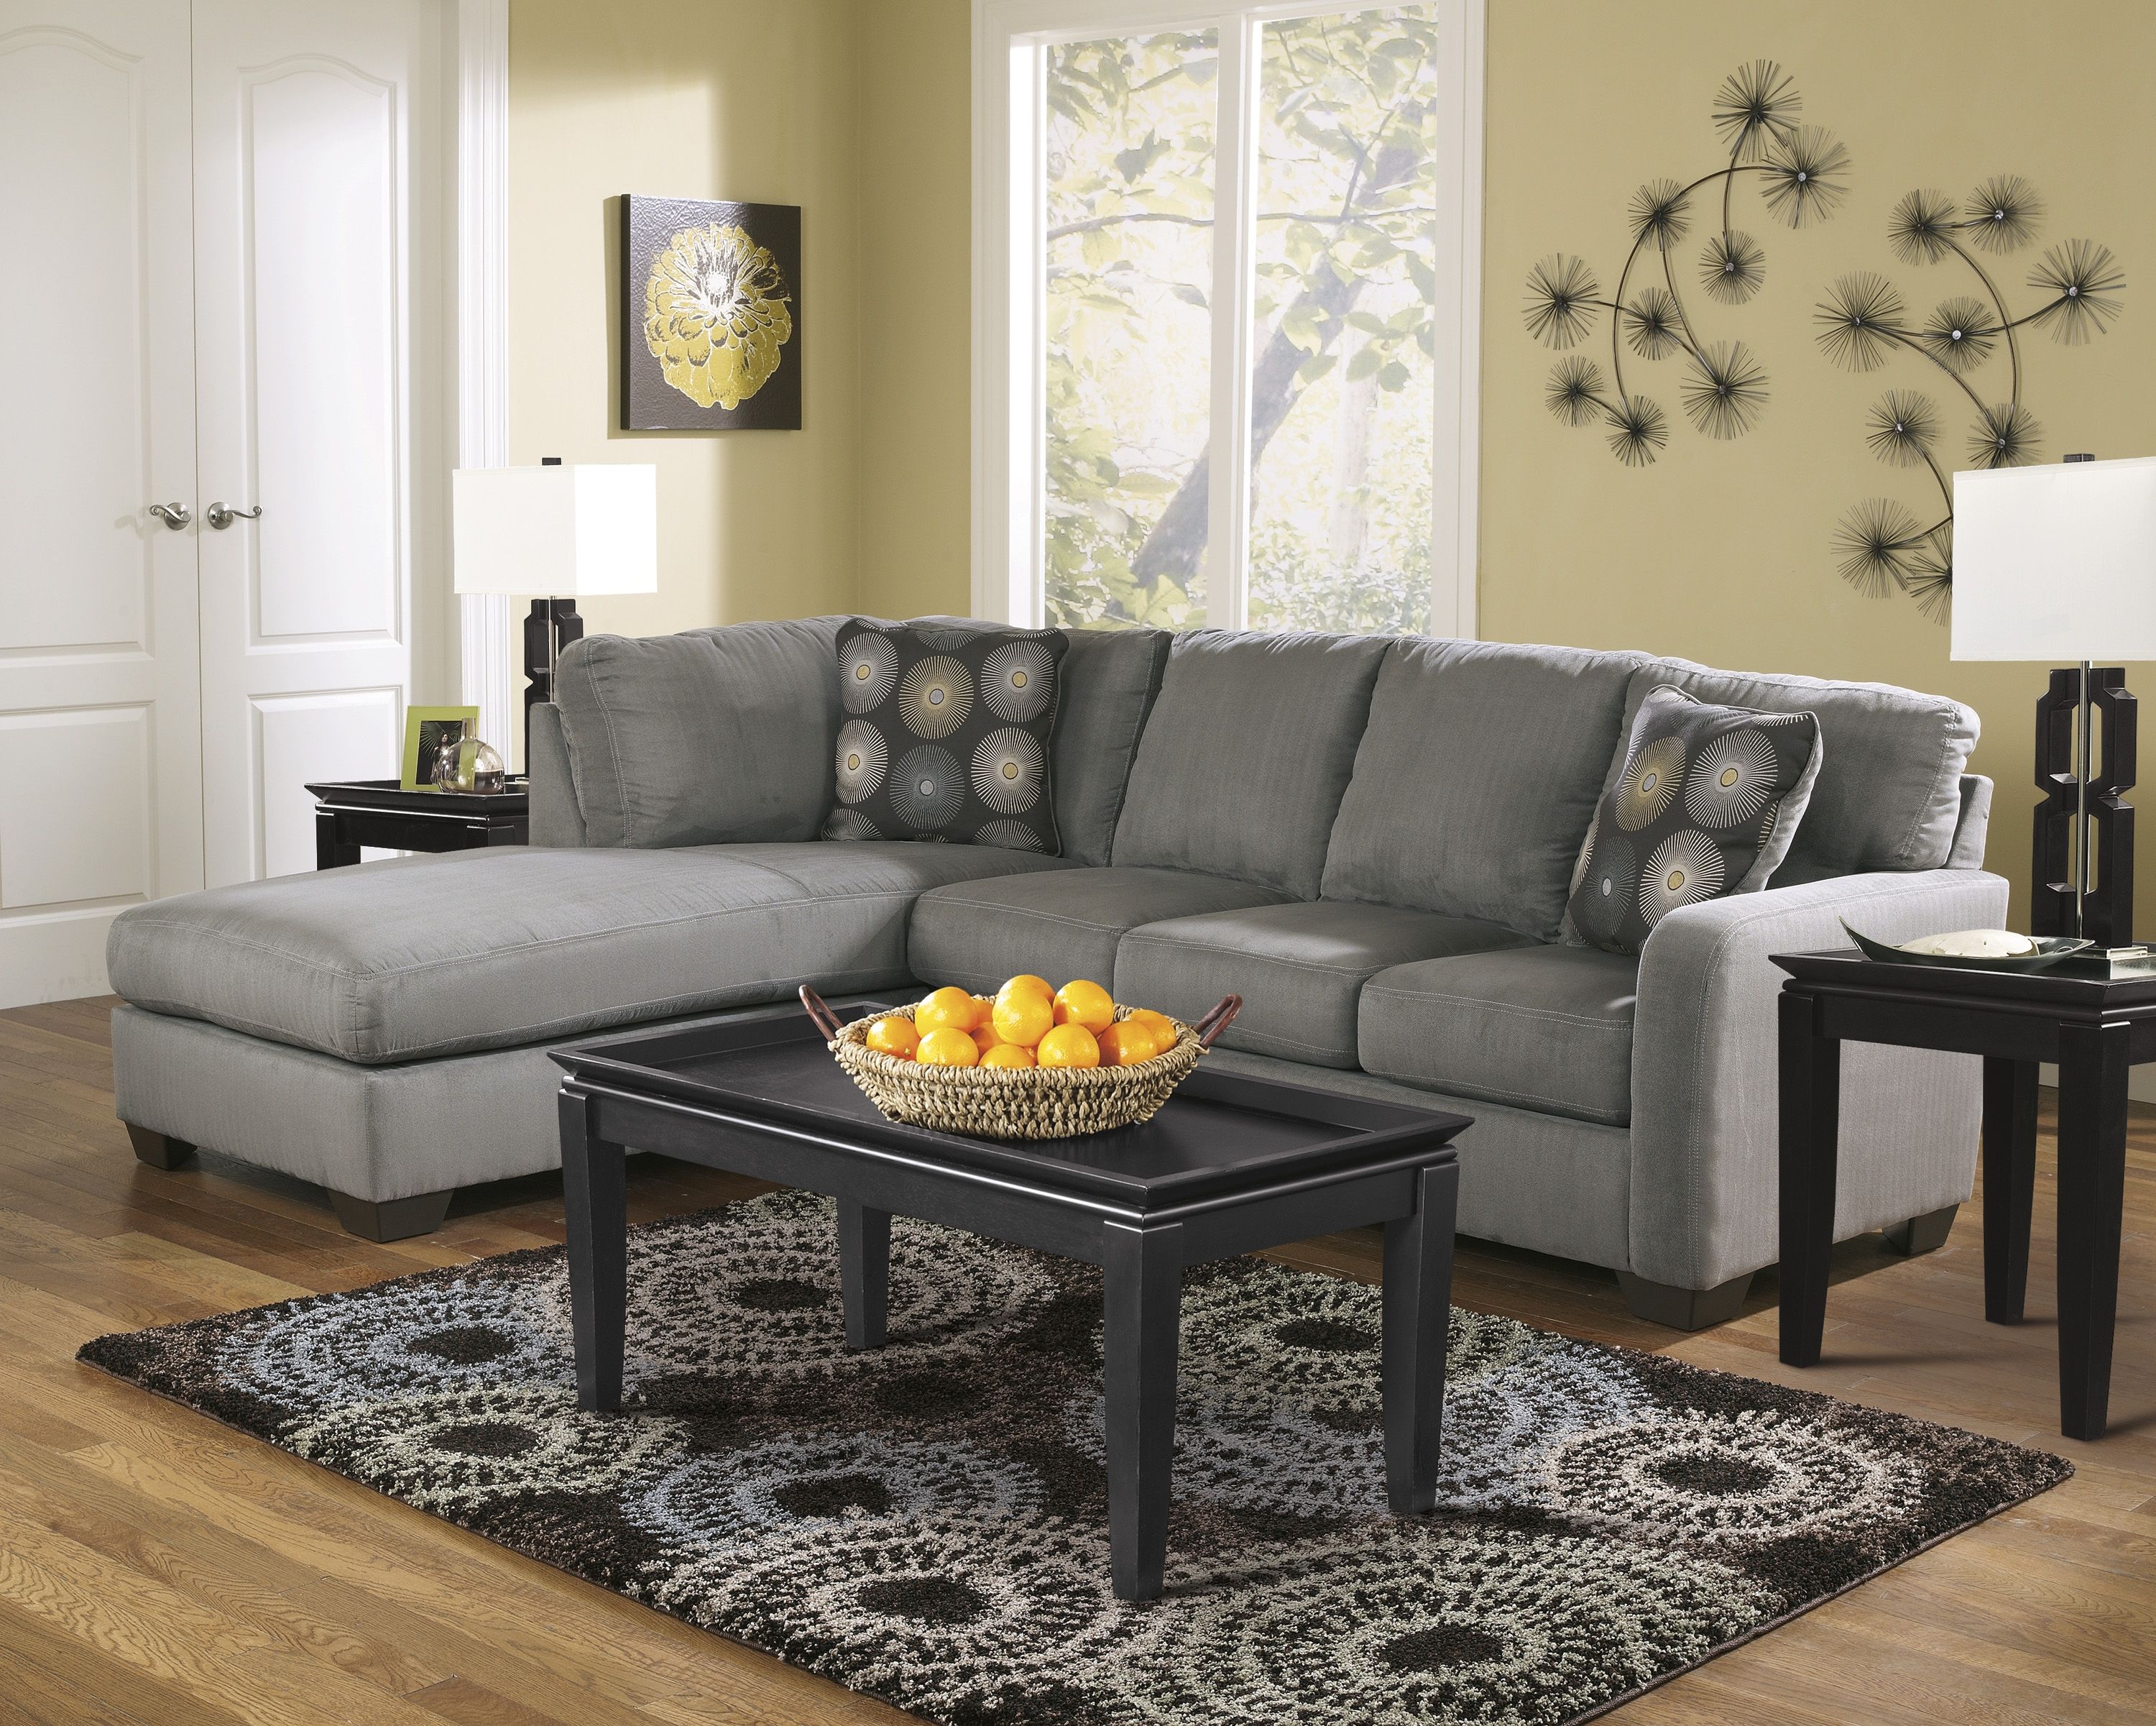 12 Best Coffee Table for Sectional Sofa with Chaise